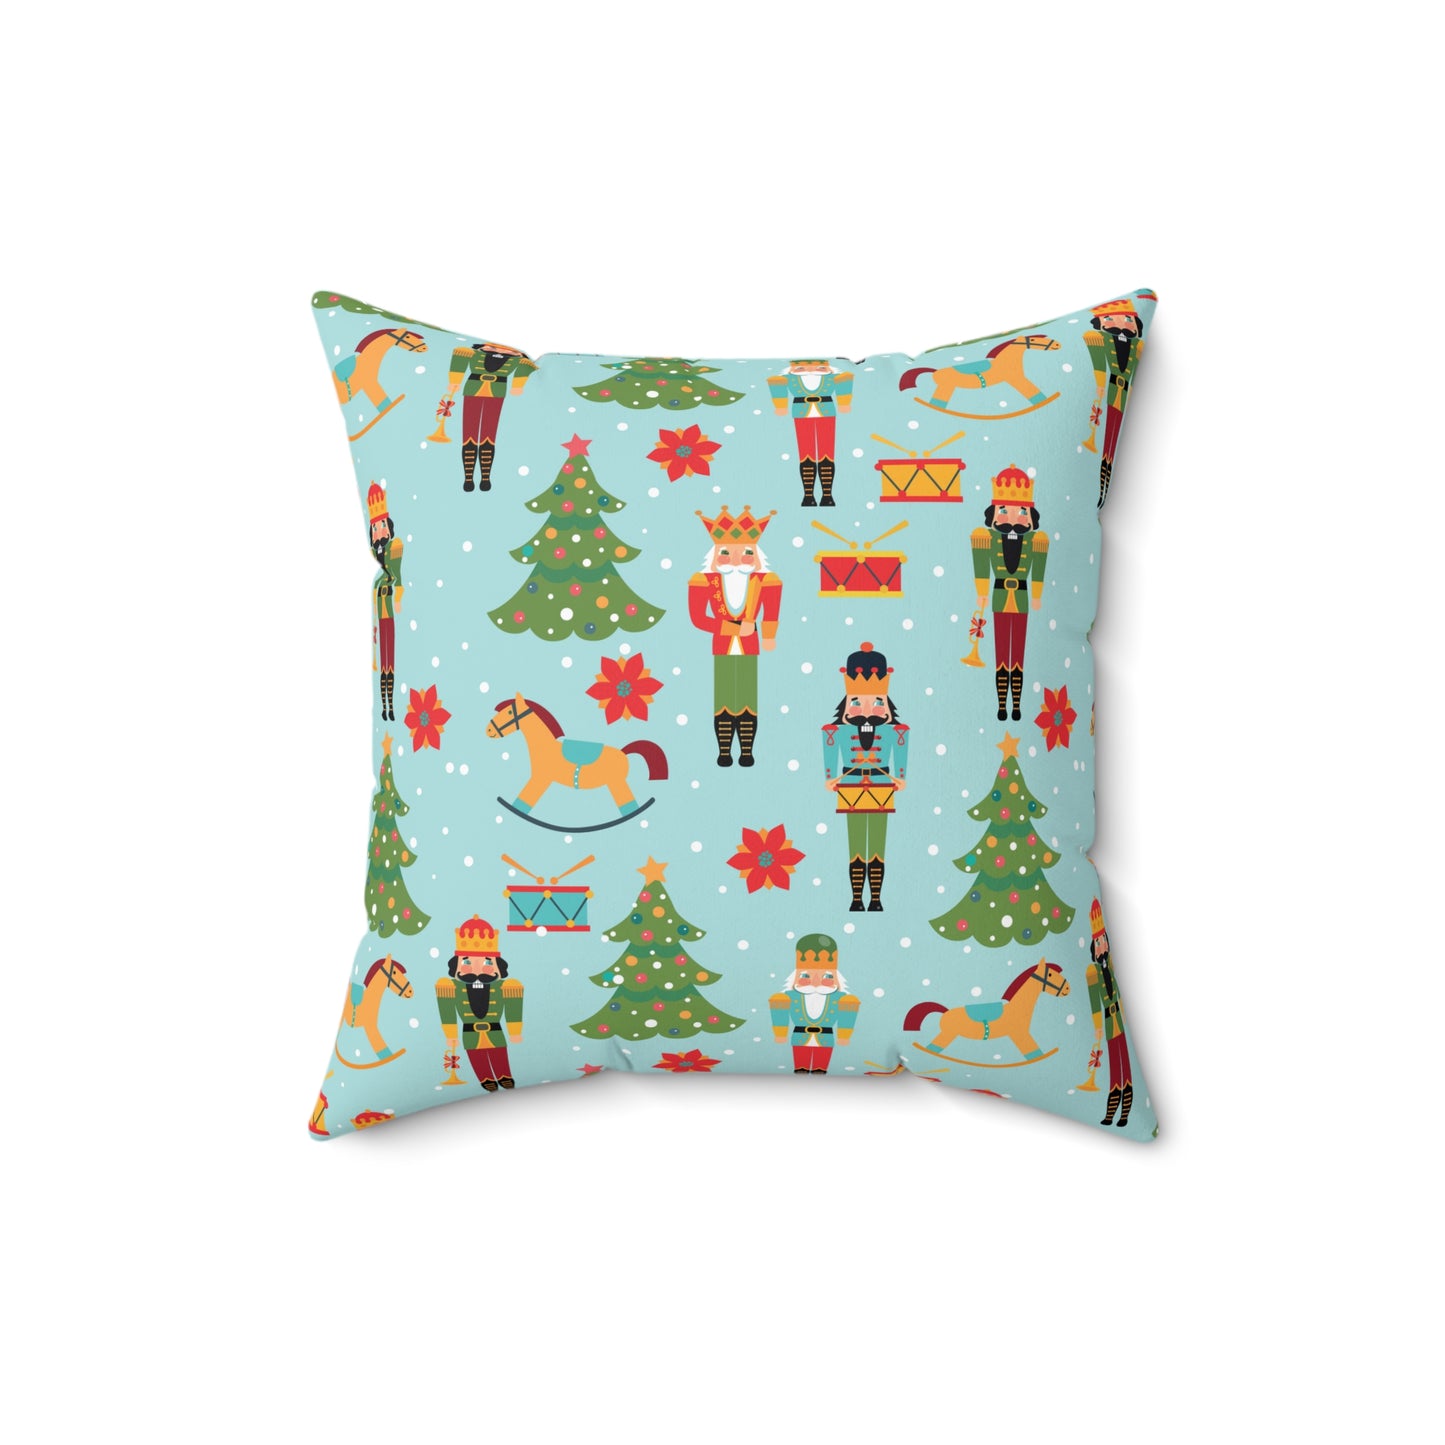 Nutcrackers and Rocking Horses Spun Polyester Square Pillow